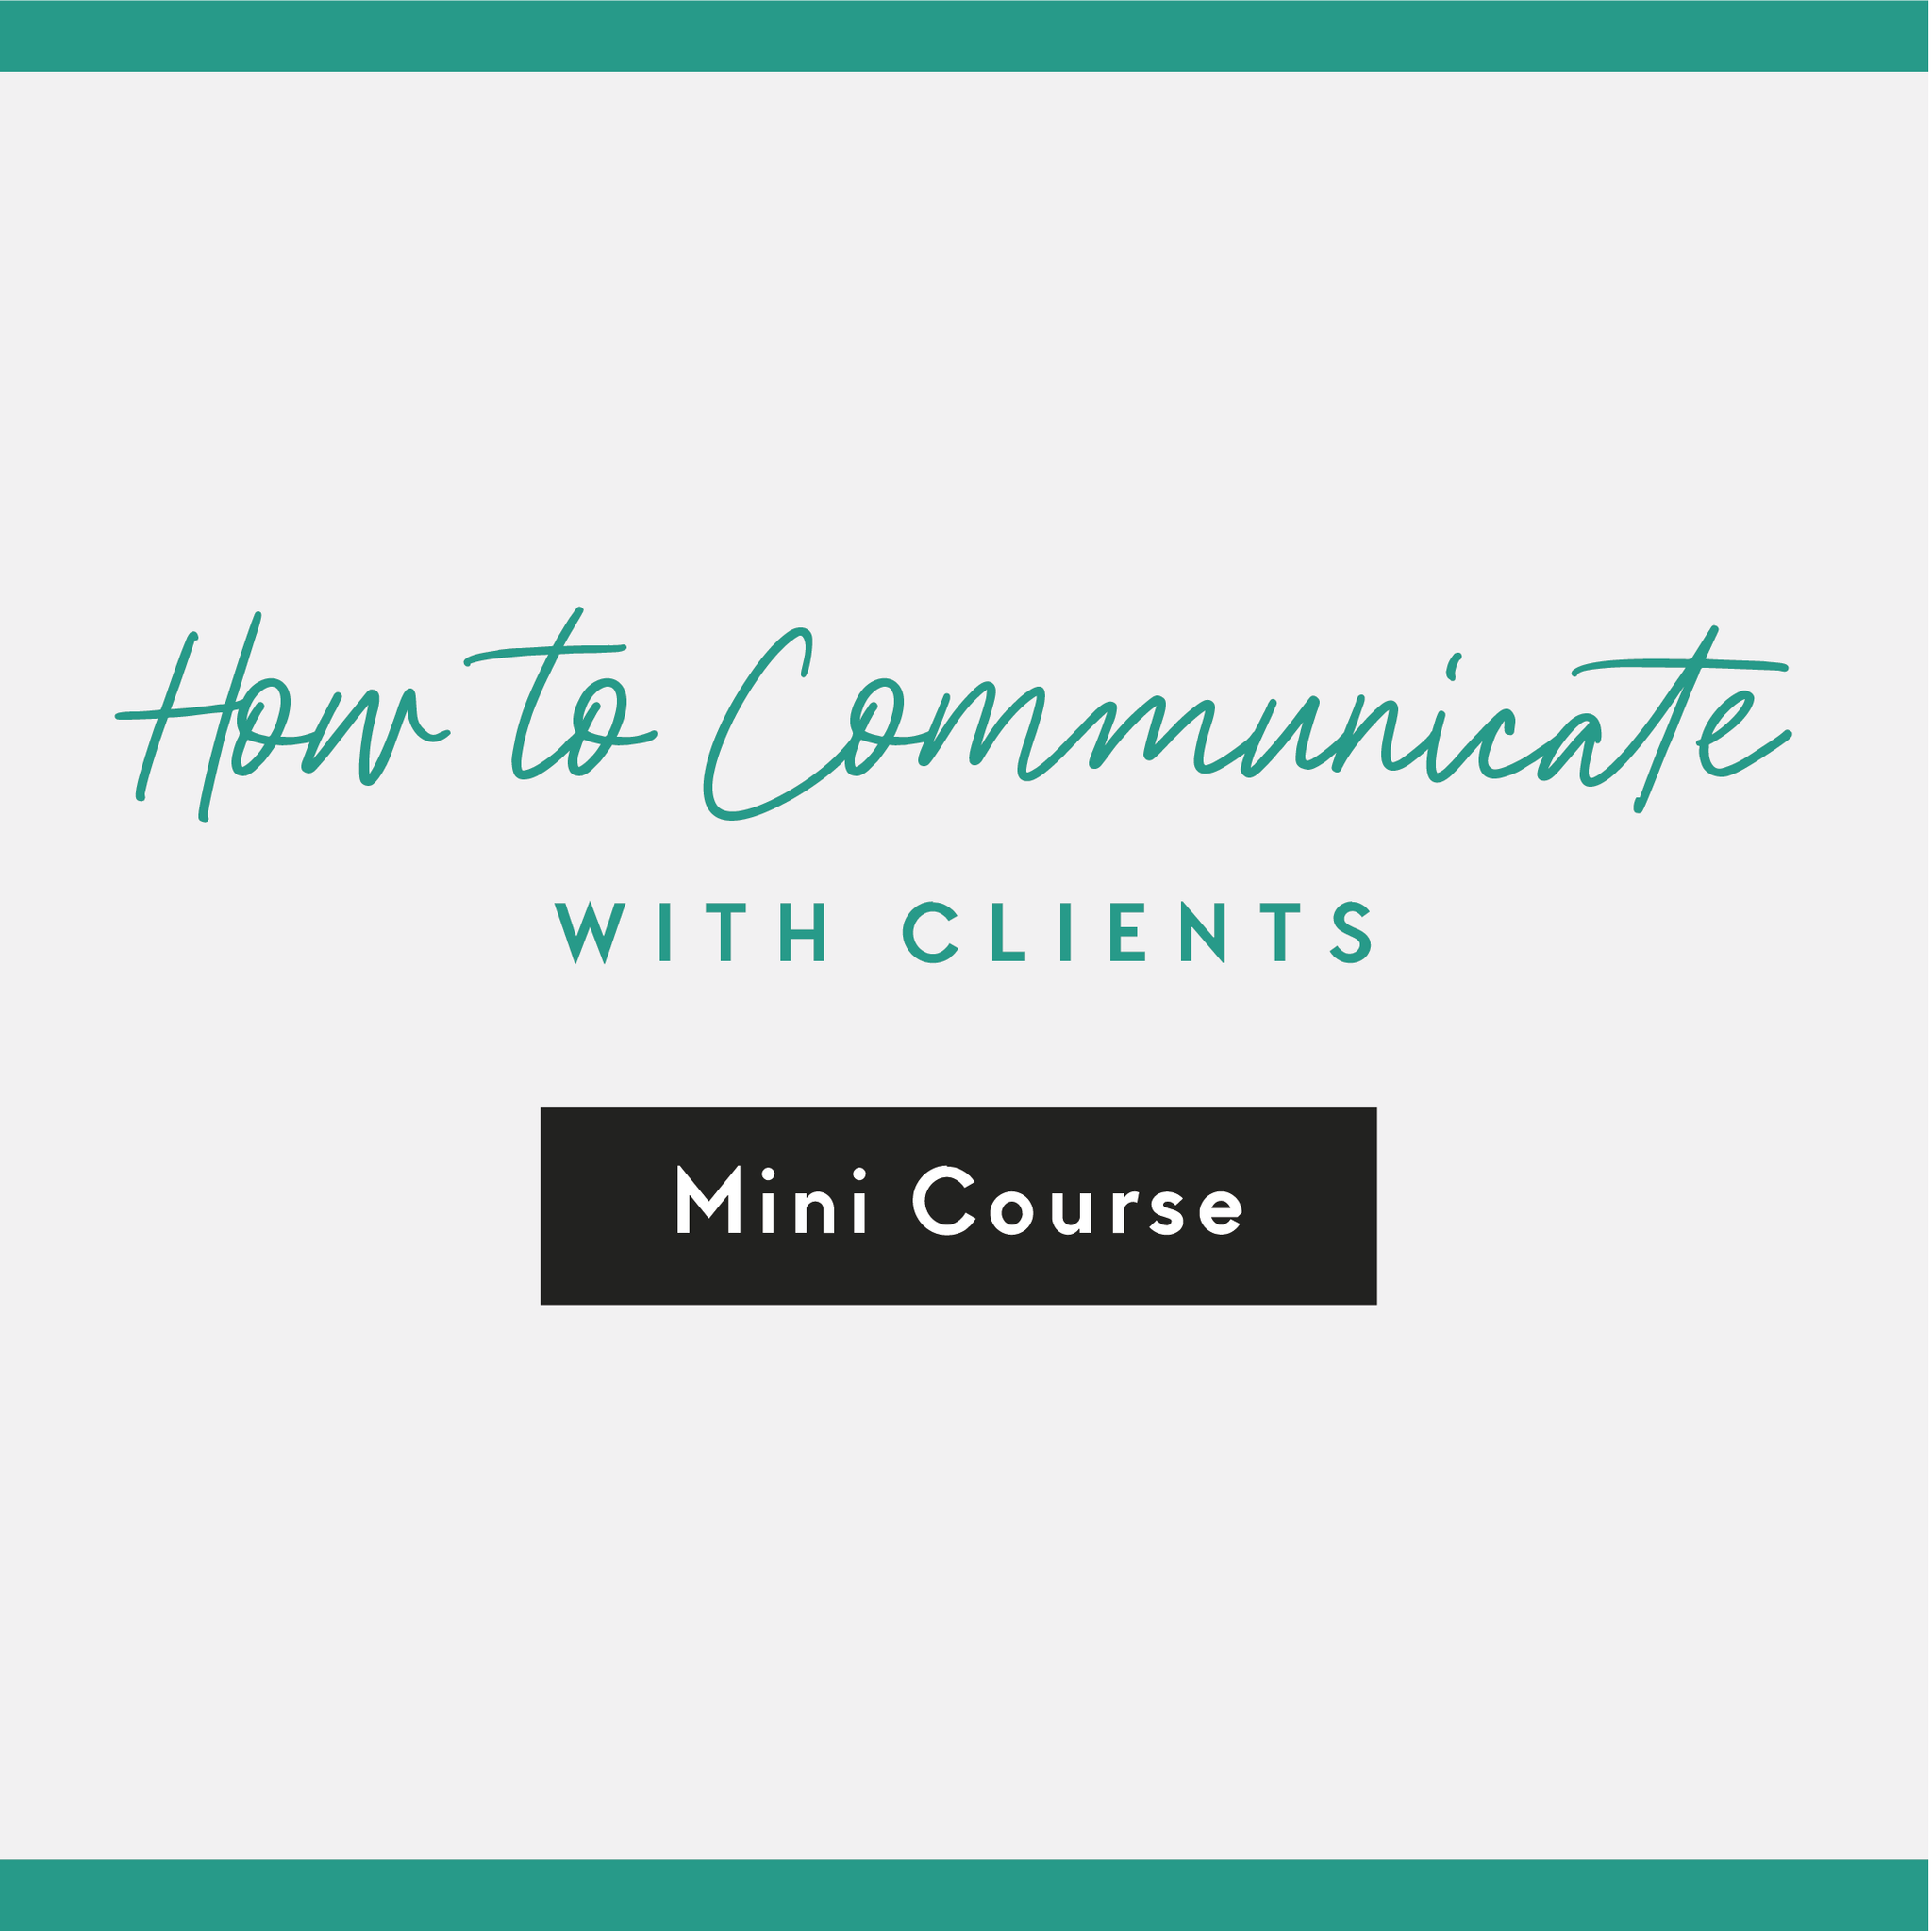 How To Communicate With Clients